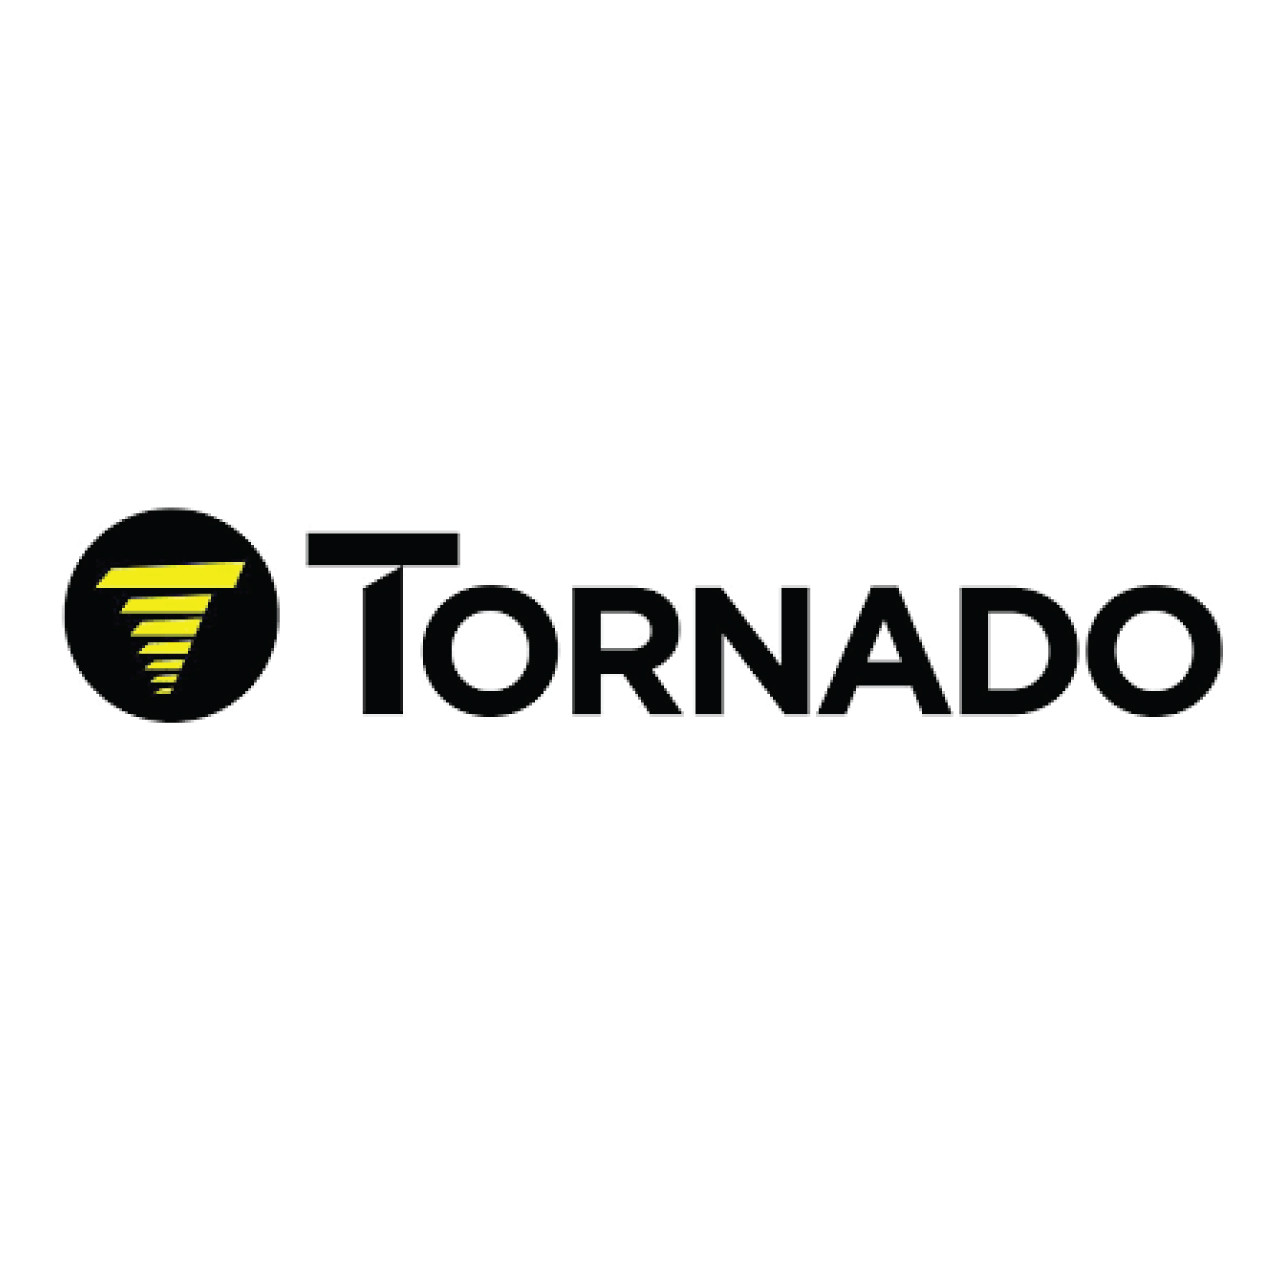 Tornado AA176.1 - Accessories,Extractor,1-1/2 Inch,Upholstery tool,Stainless Steel,Up to 400psi, Perforated PIC